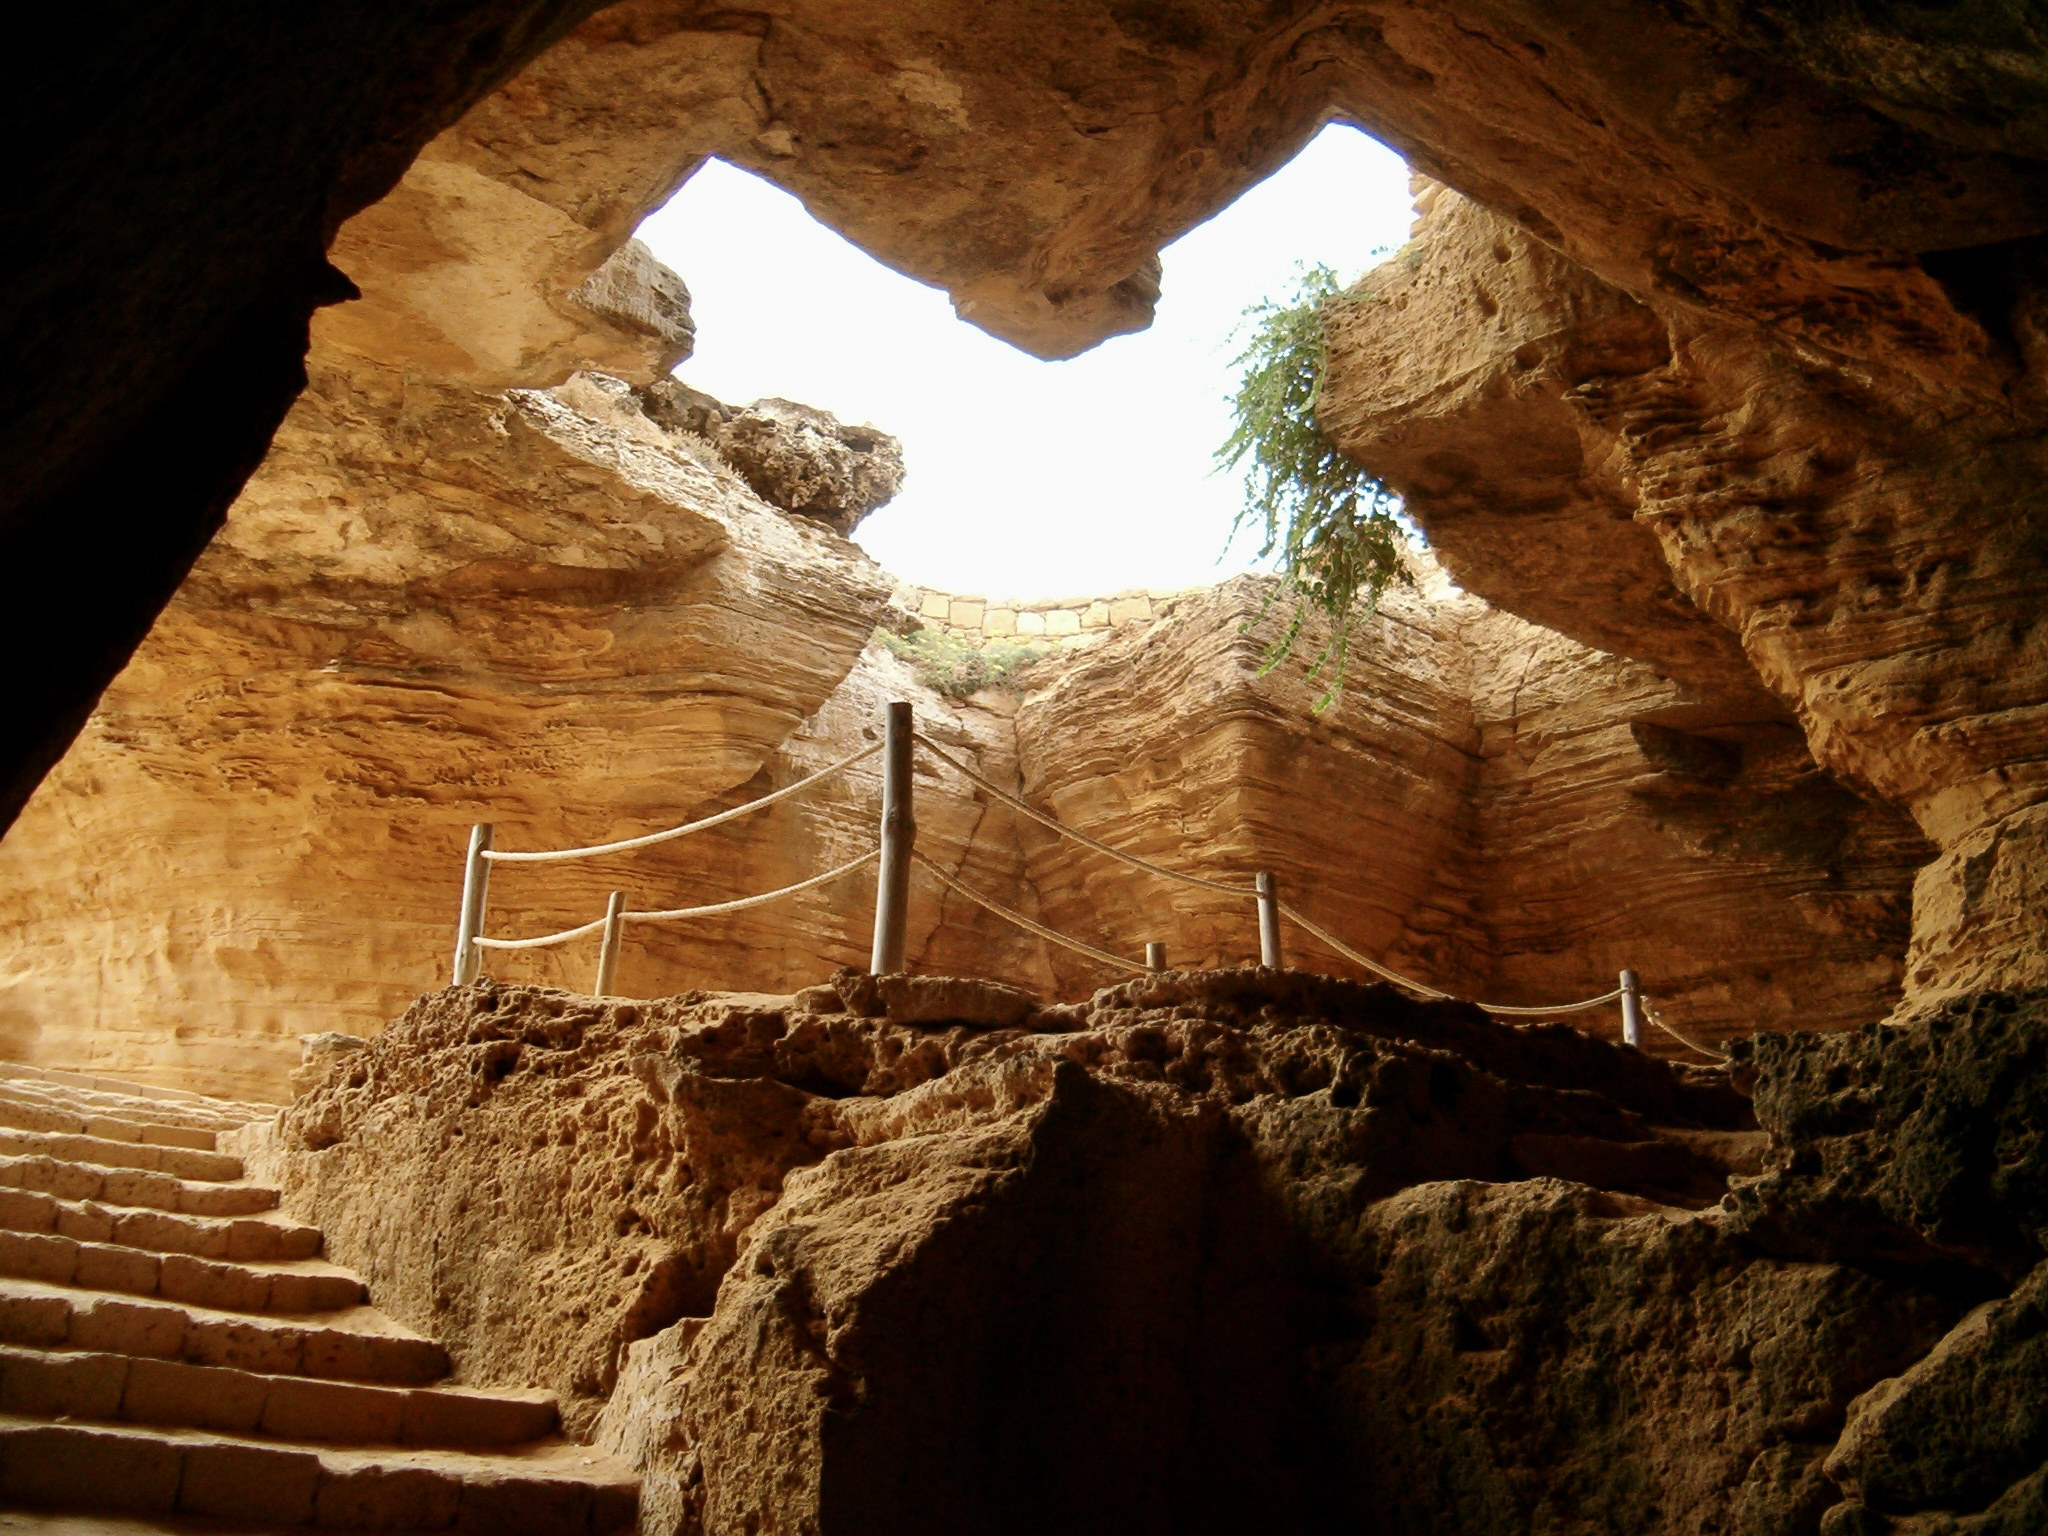 A cave with a heart-shaped entrance